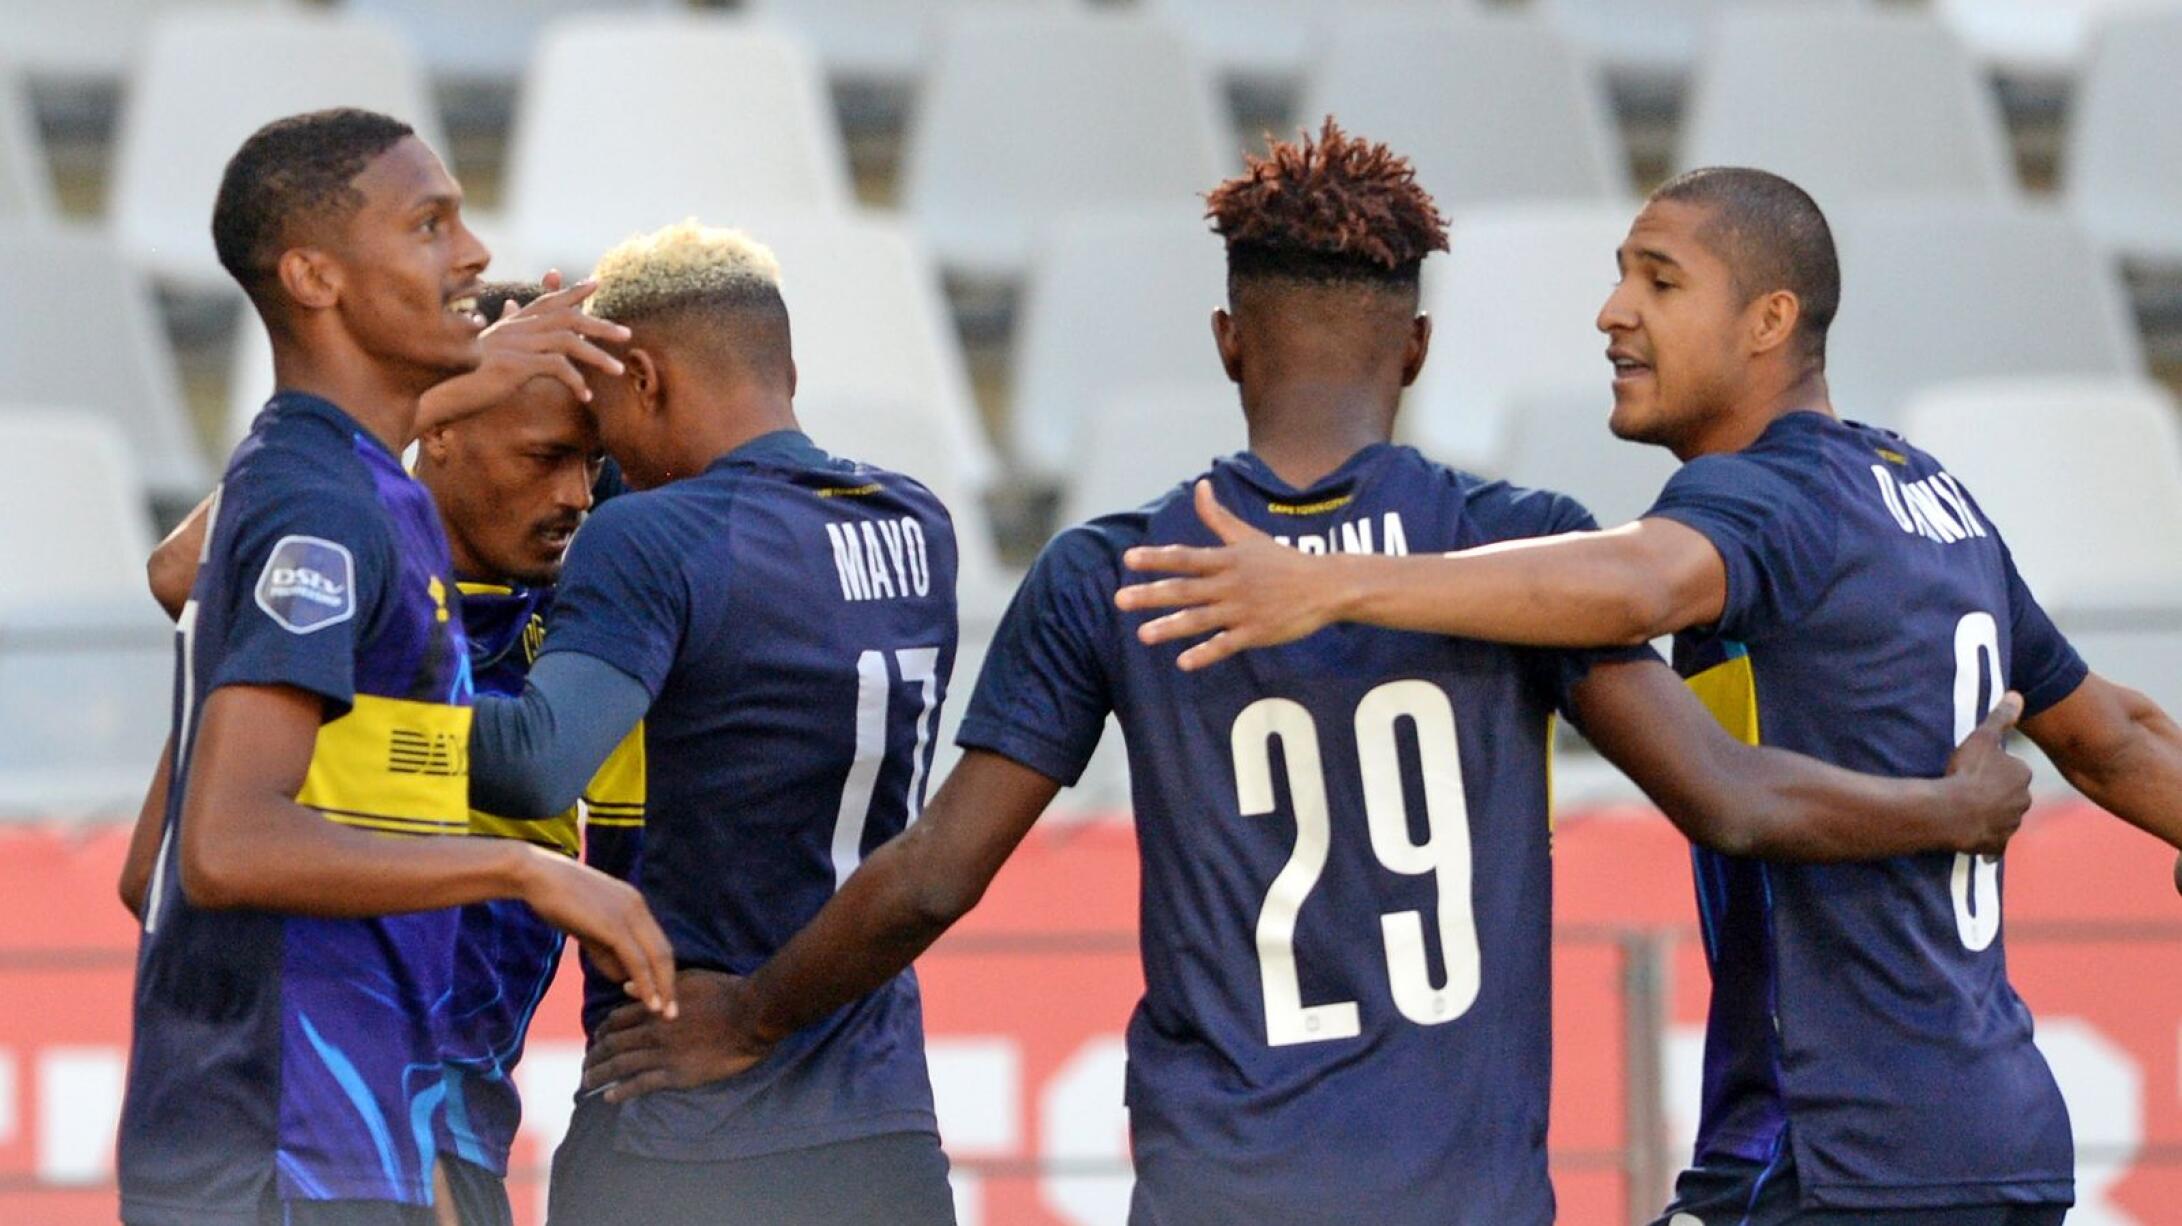 Cape Town City players celebrate a goal scored by Craig Martin during their DStv Premiership game against Sekhukhune United at Cape Town Stadium on Saturday